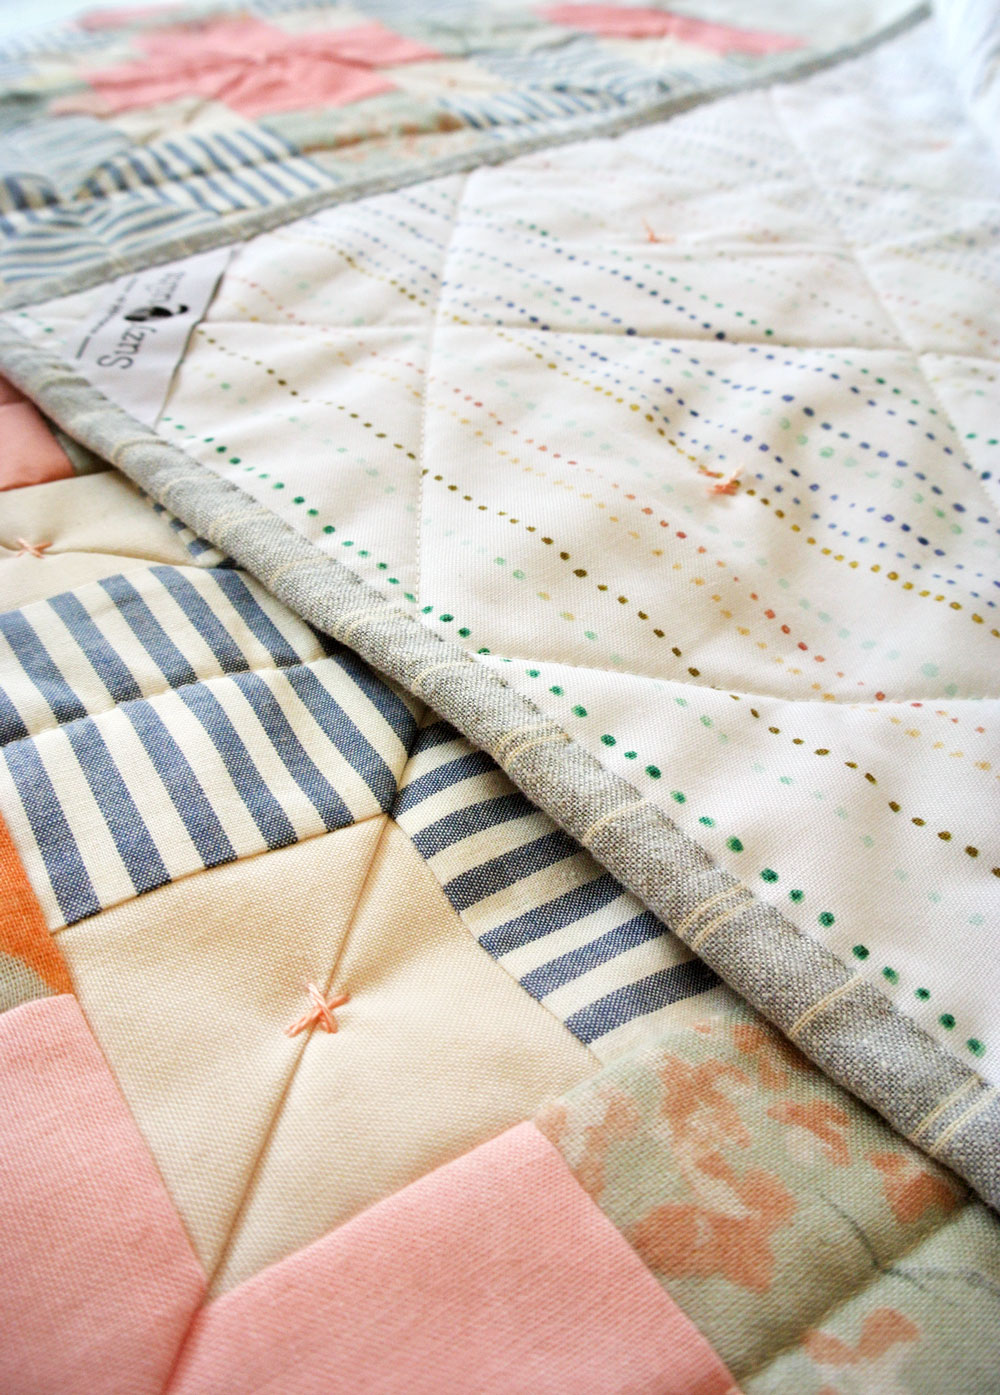 How Long Should The Ties Be On A Baby Quilt?